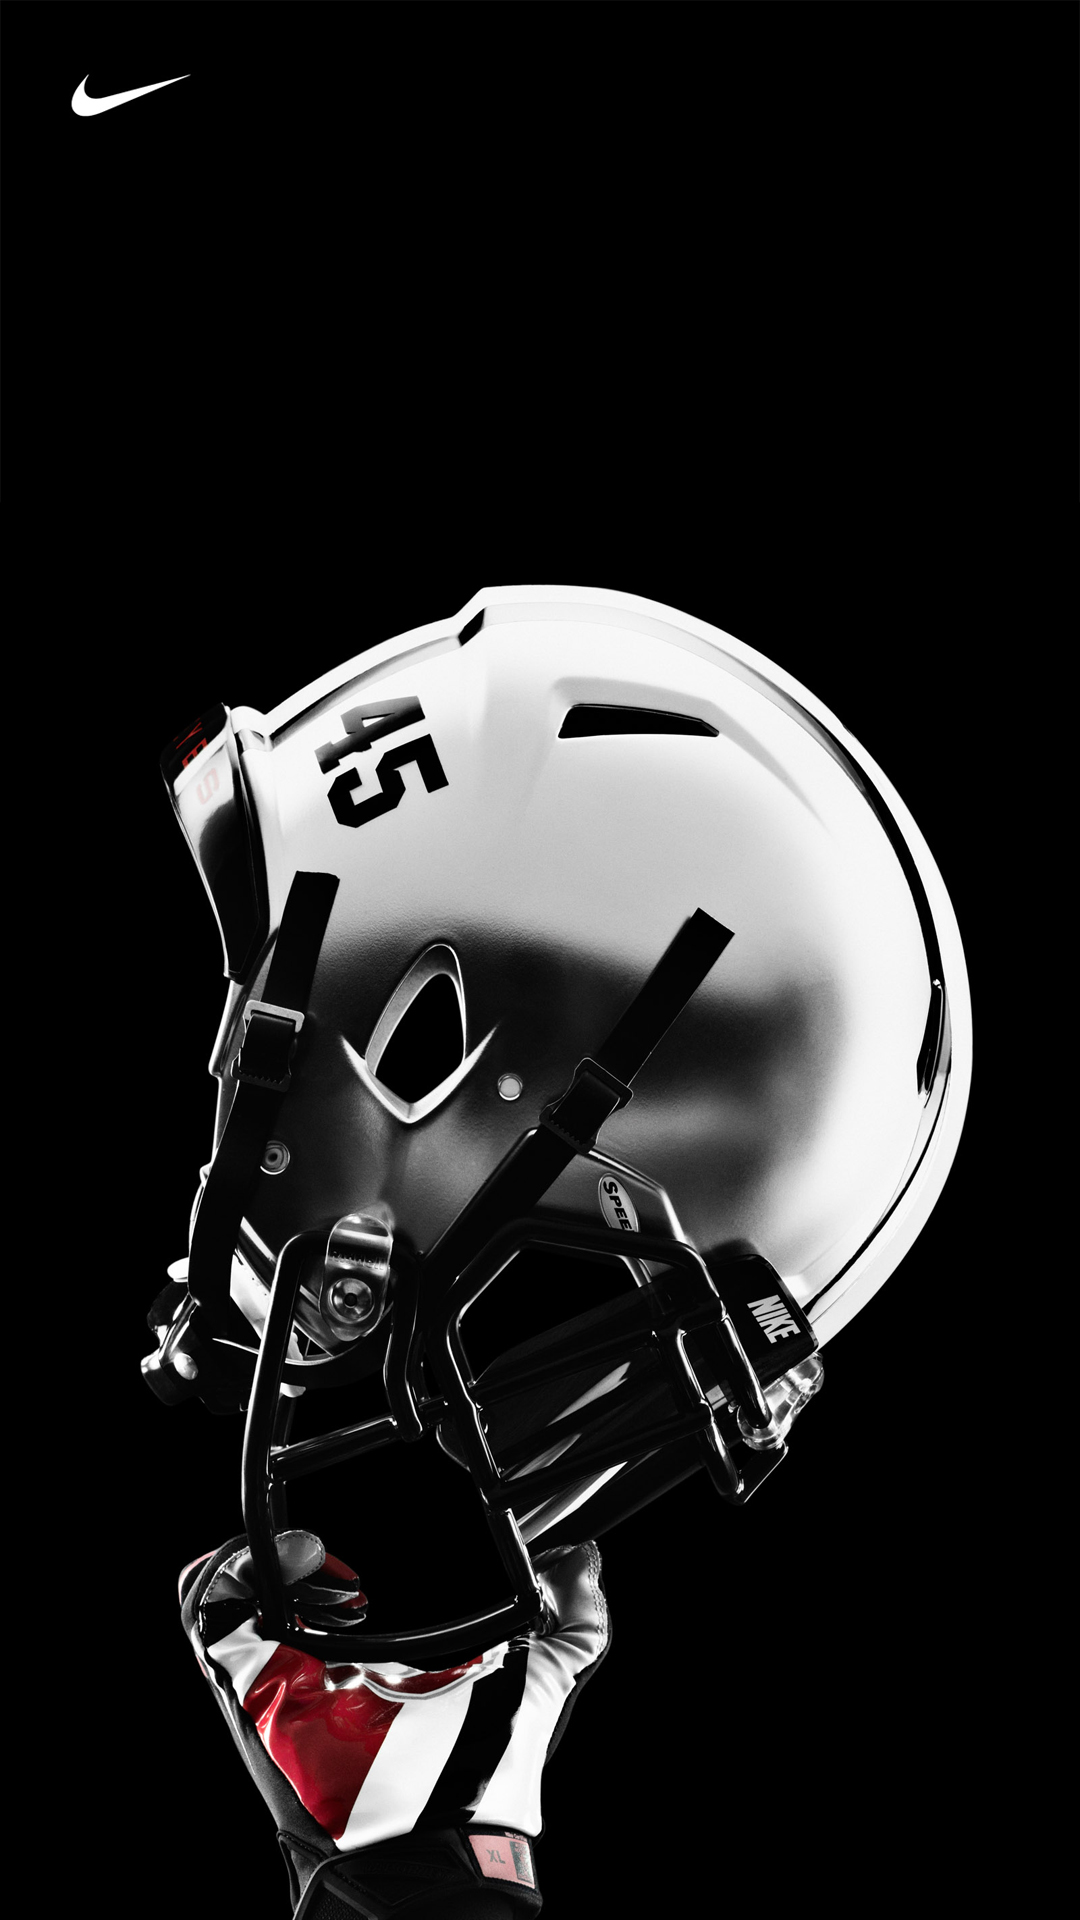 Ohio State Football Helmet Wallpaper Image Pictures Becuo